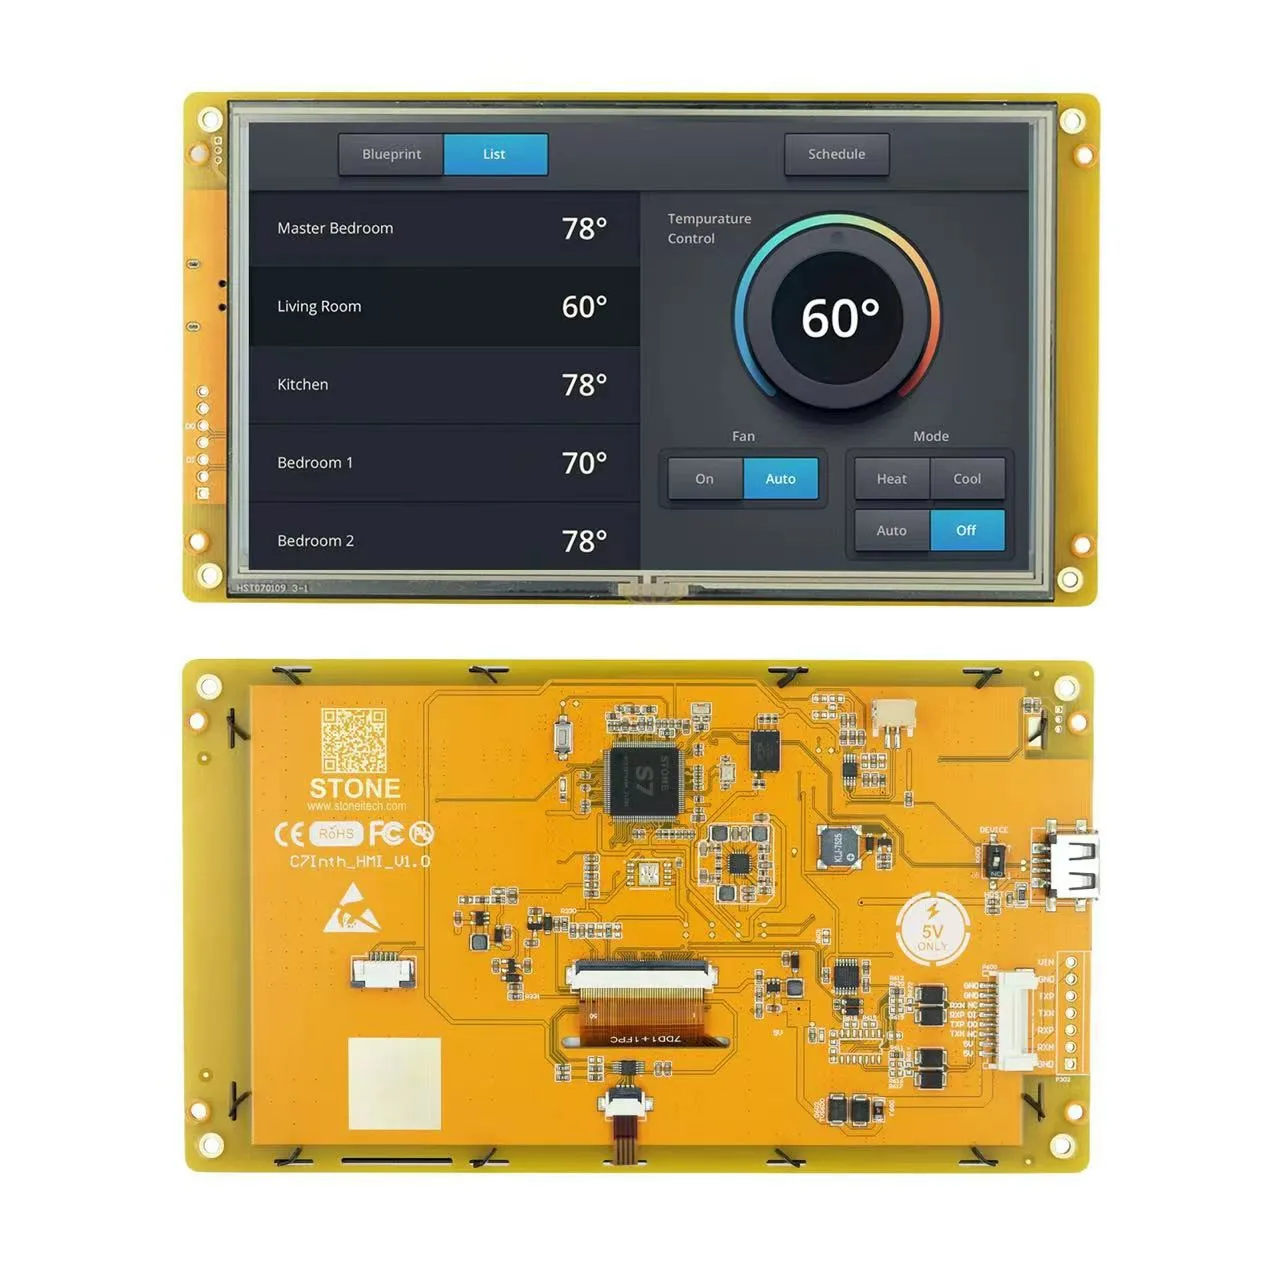 7.0 Inch Smart HMI Screen Clear, Detailed, Hi Res HD - TFT LCD display offers excellent high resolution with 4-wire resistance